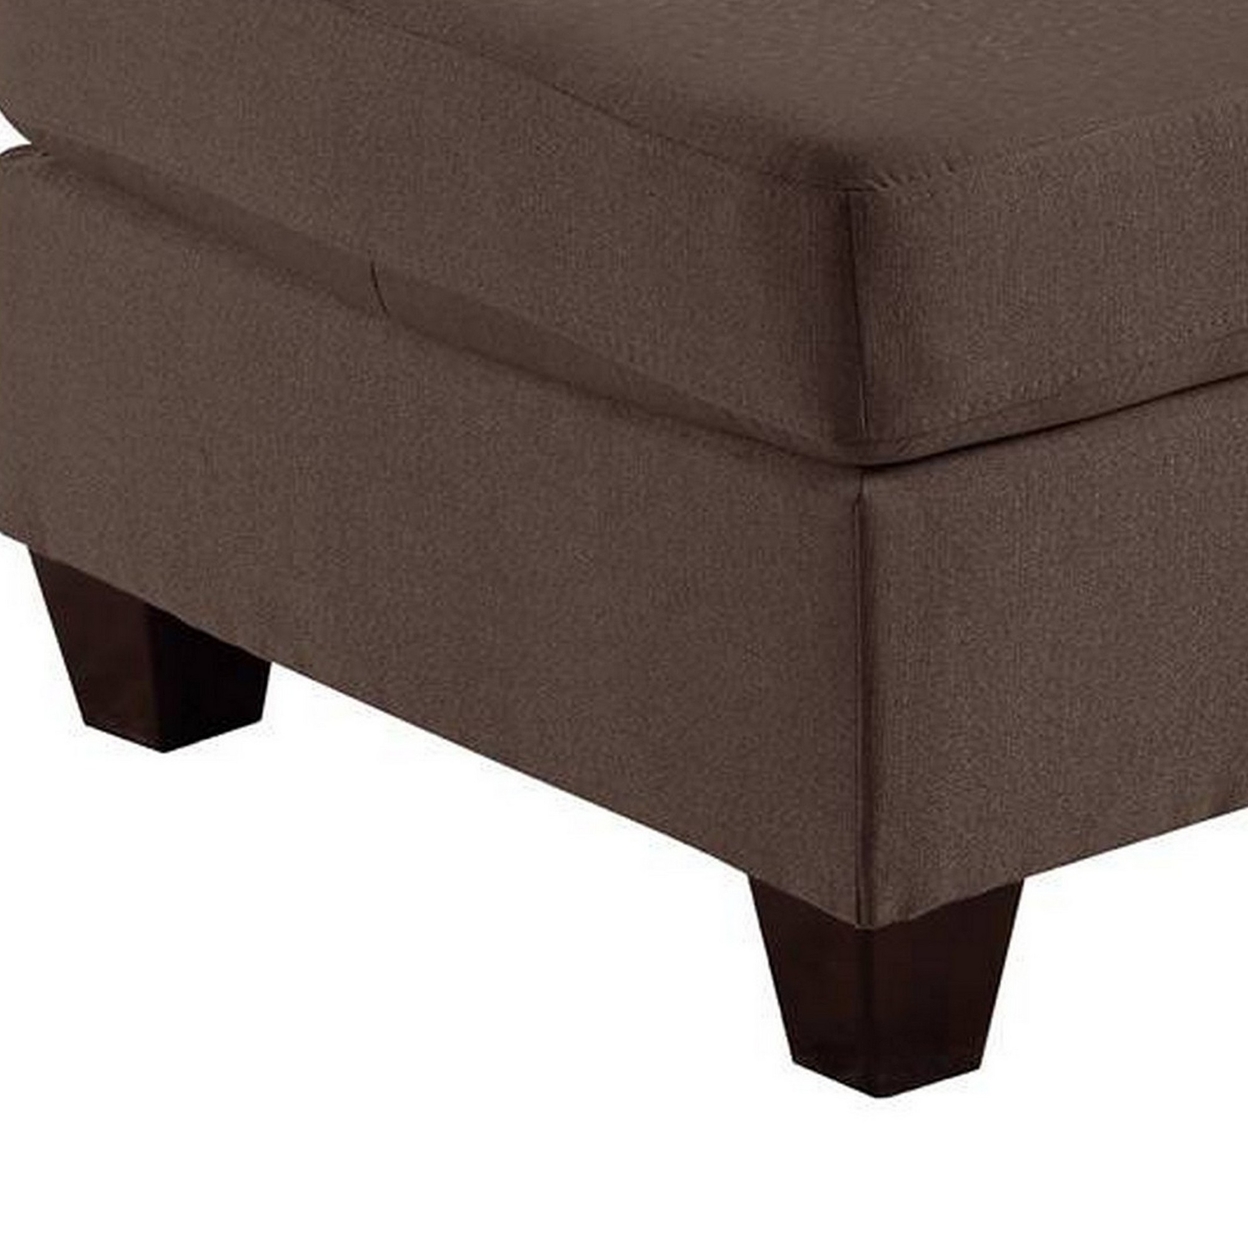 32 Inch Modern Square Ottoman With Foam Seating, Coffee Brown Linen Fabric